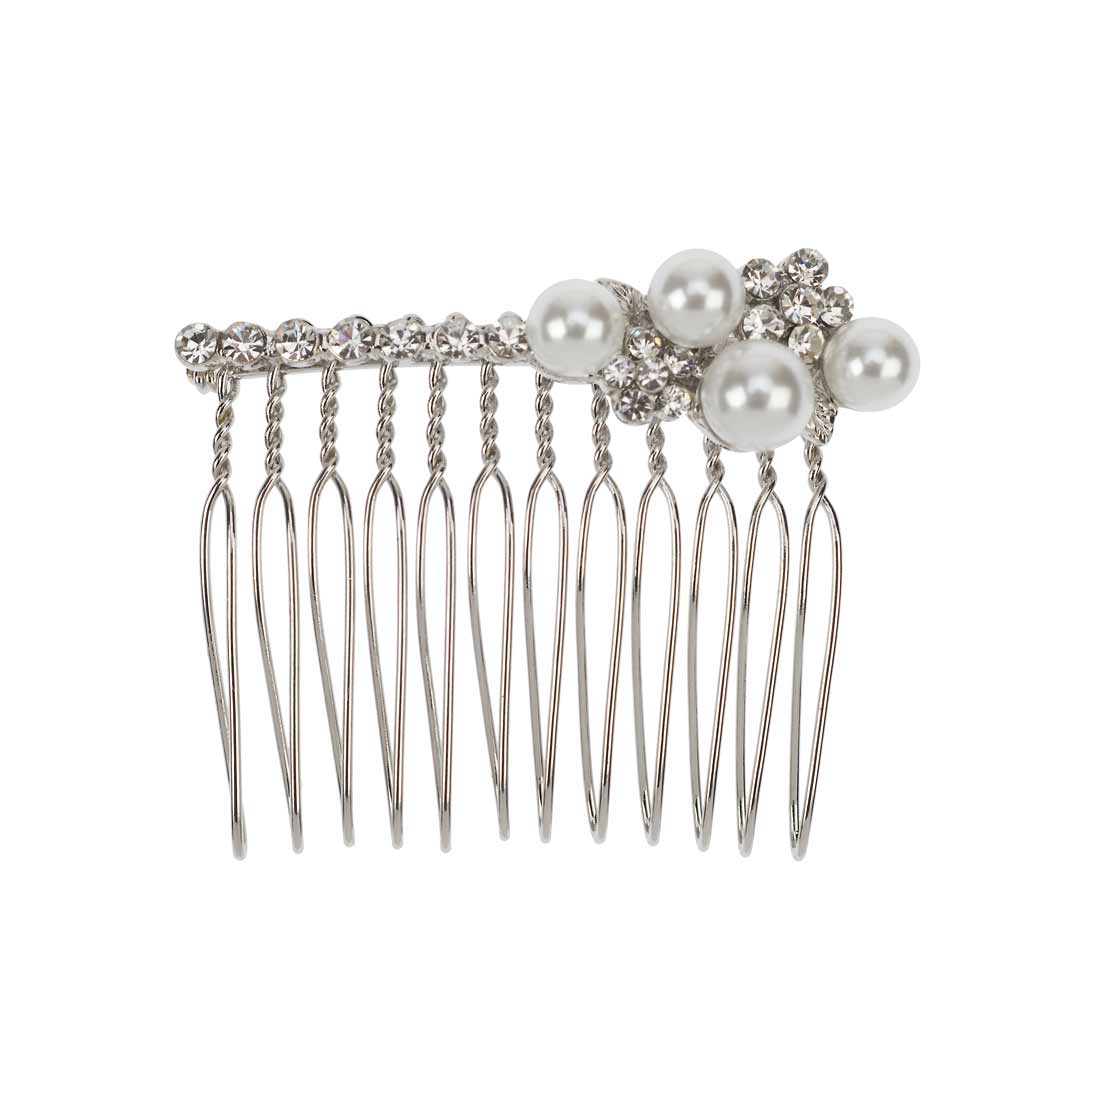 Vintage Charm Small Delicate Pearl Wedding Hair Comb